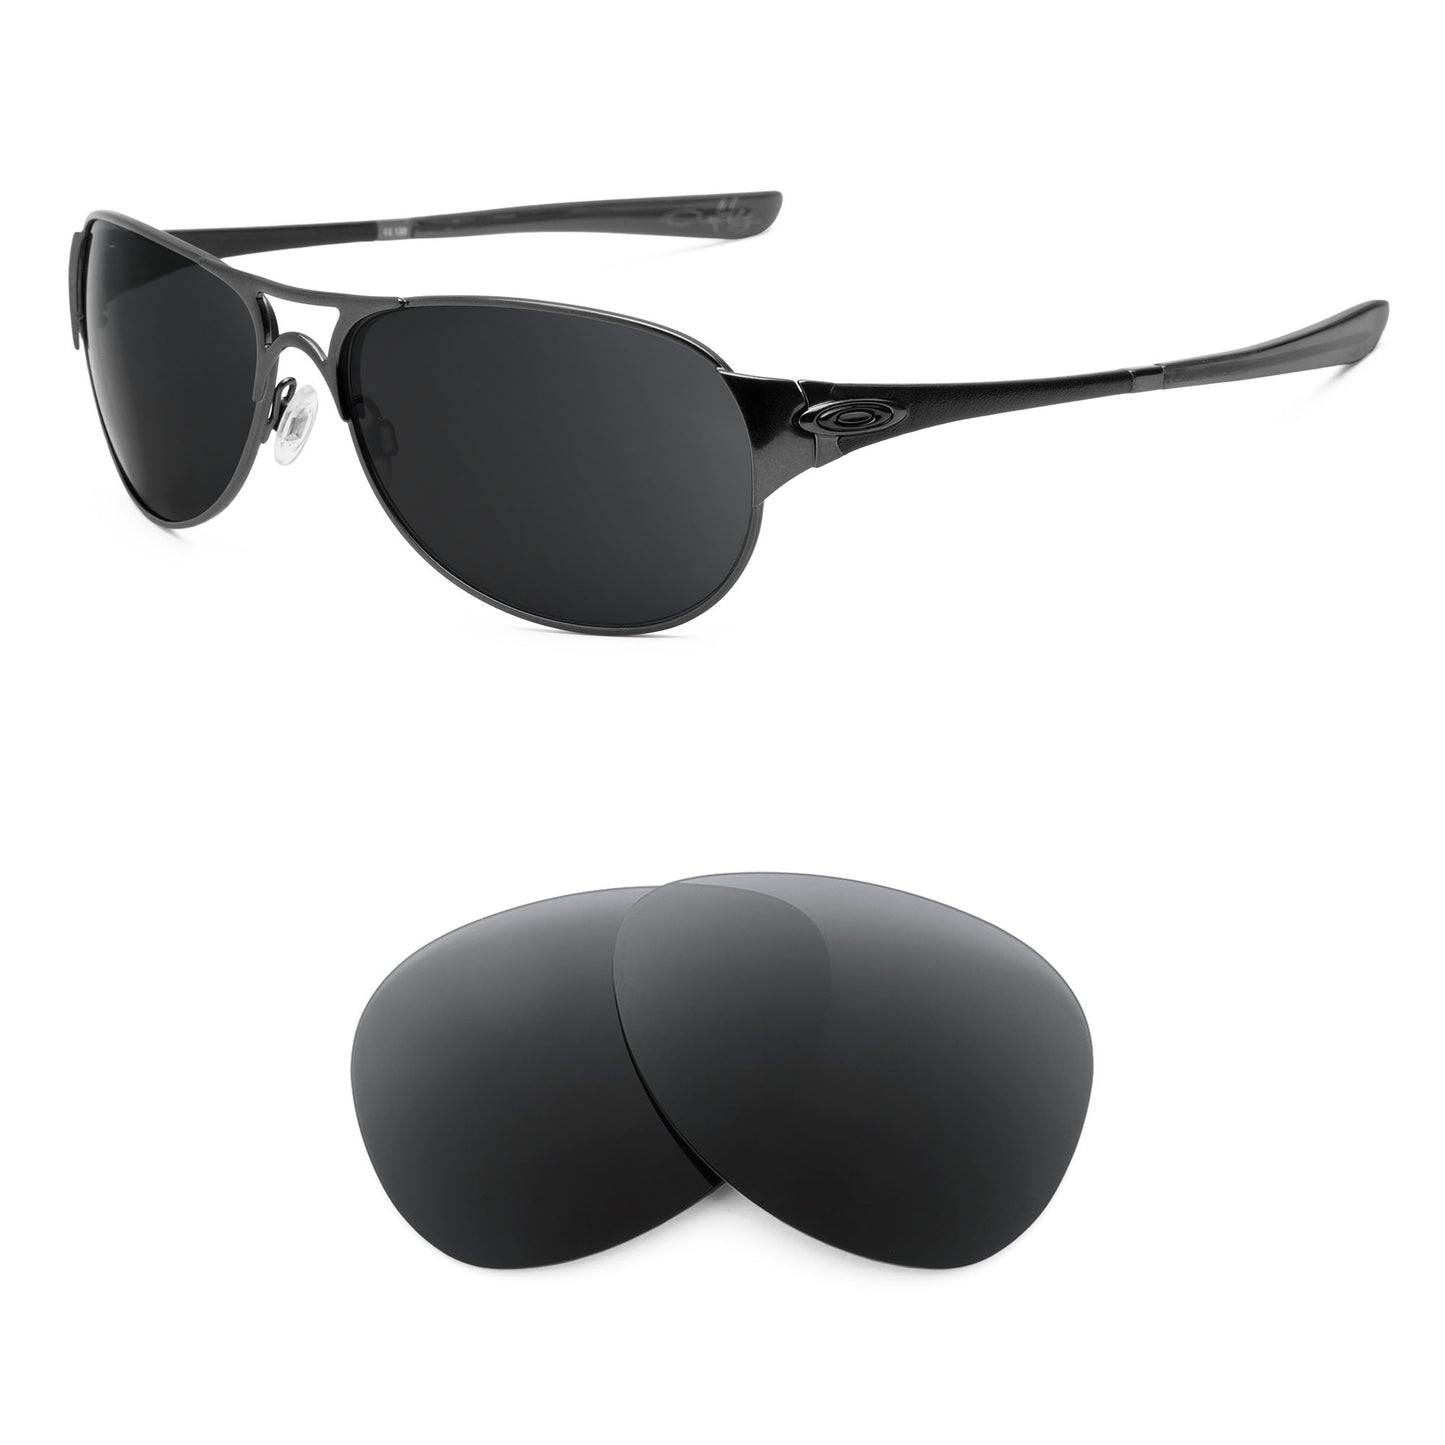 Oakley Restless sunglasses with replacement lenses